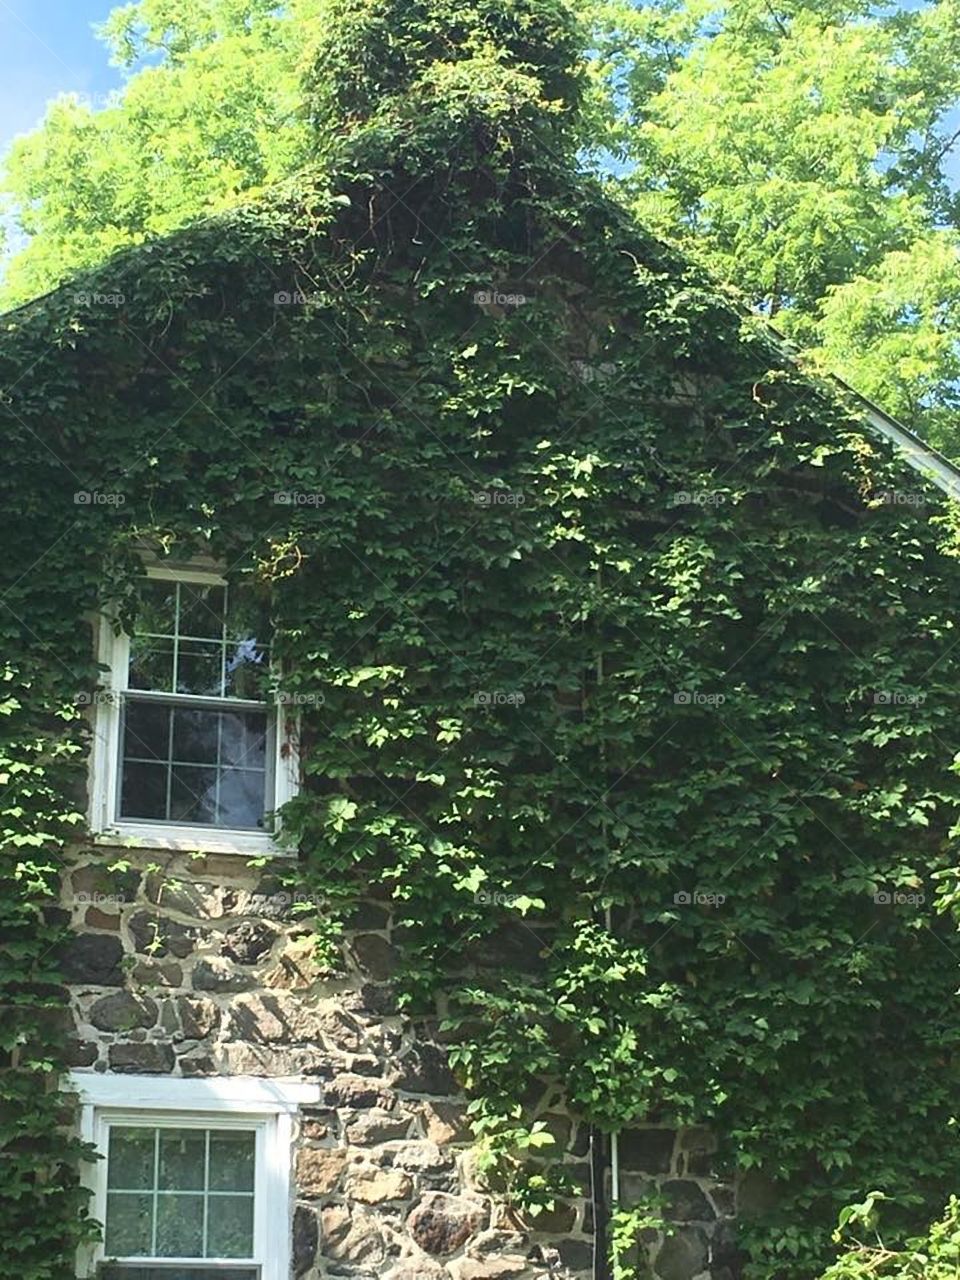 Overgrown ivy on house